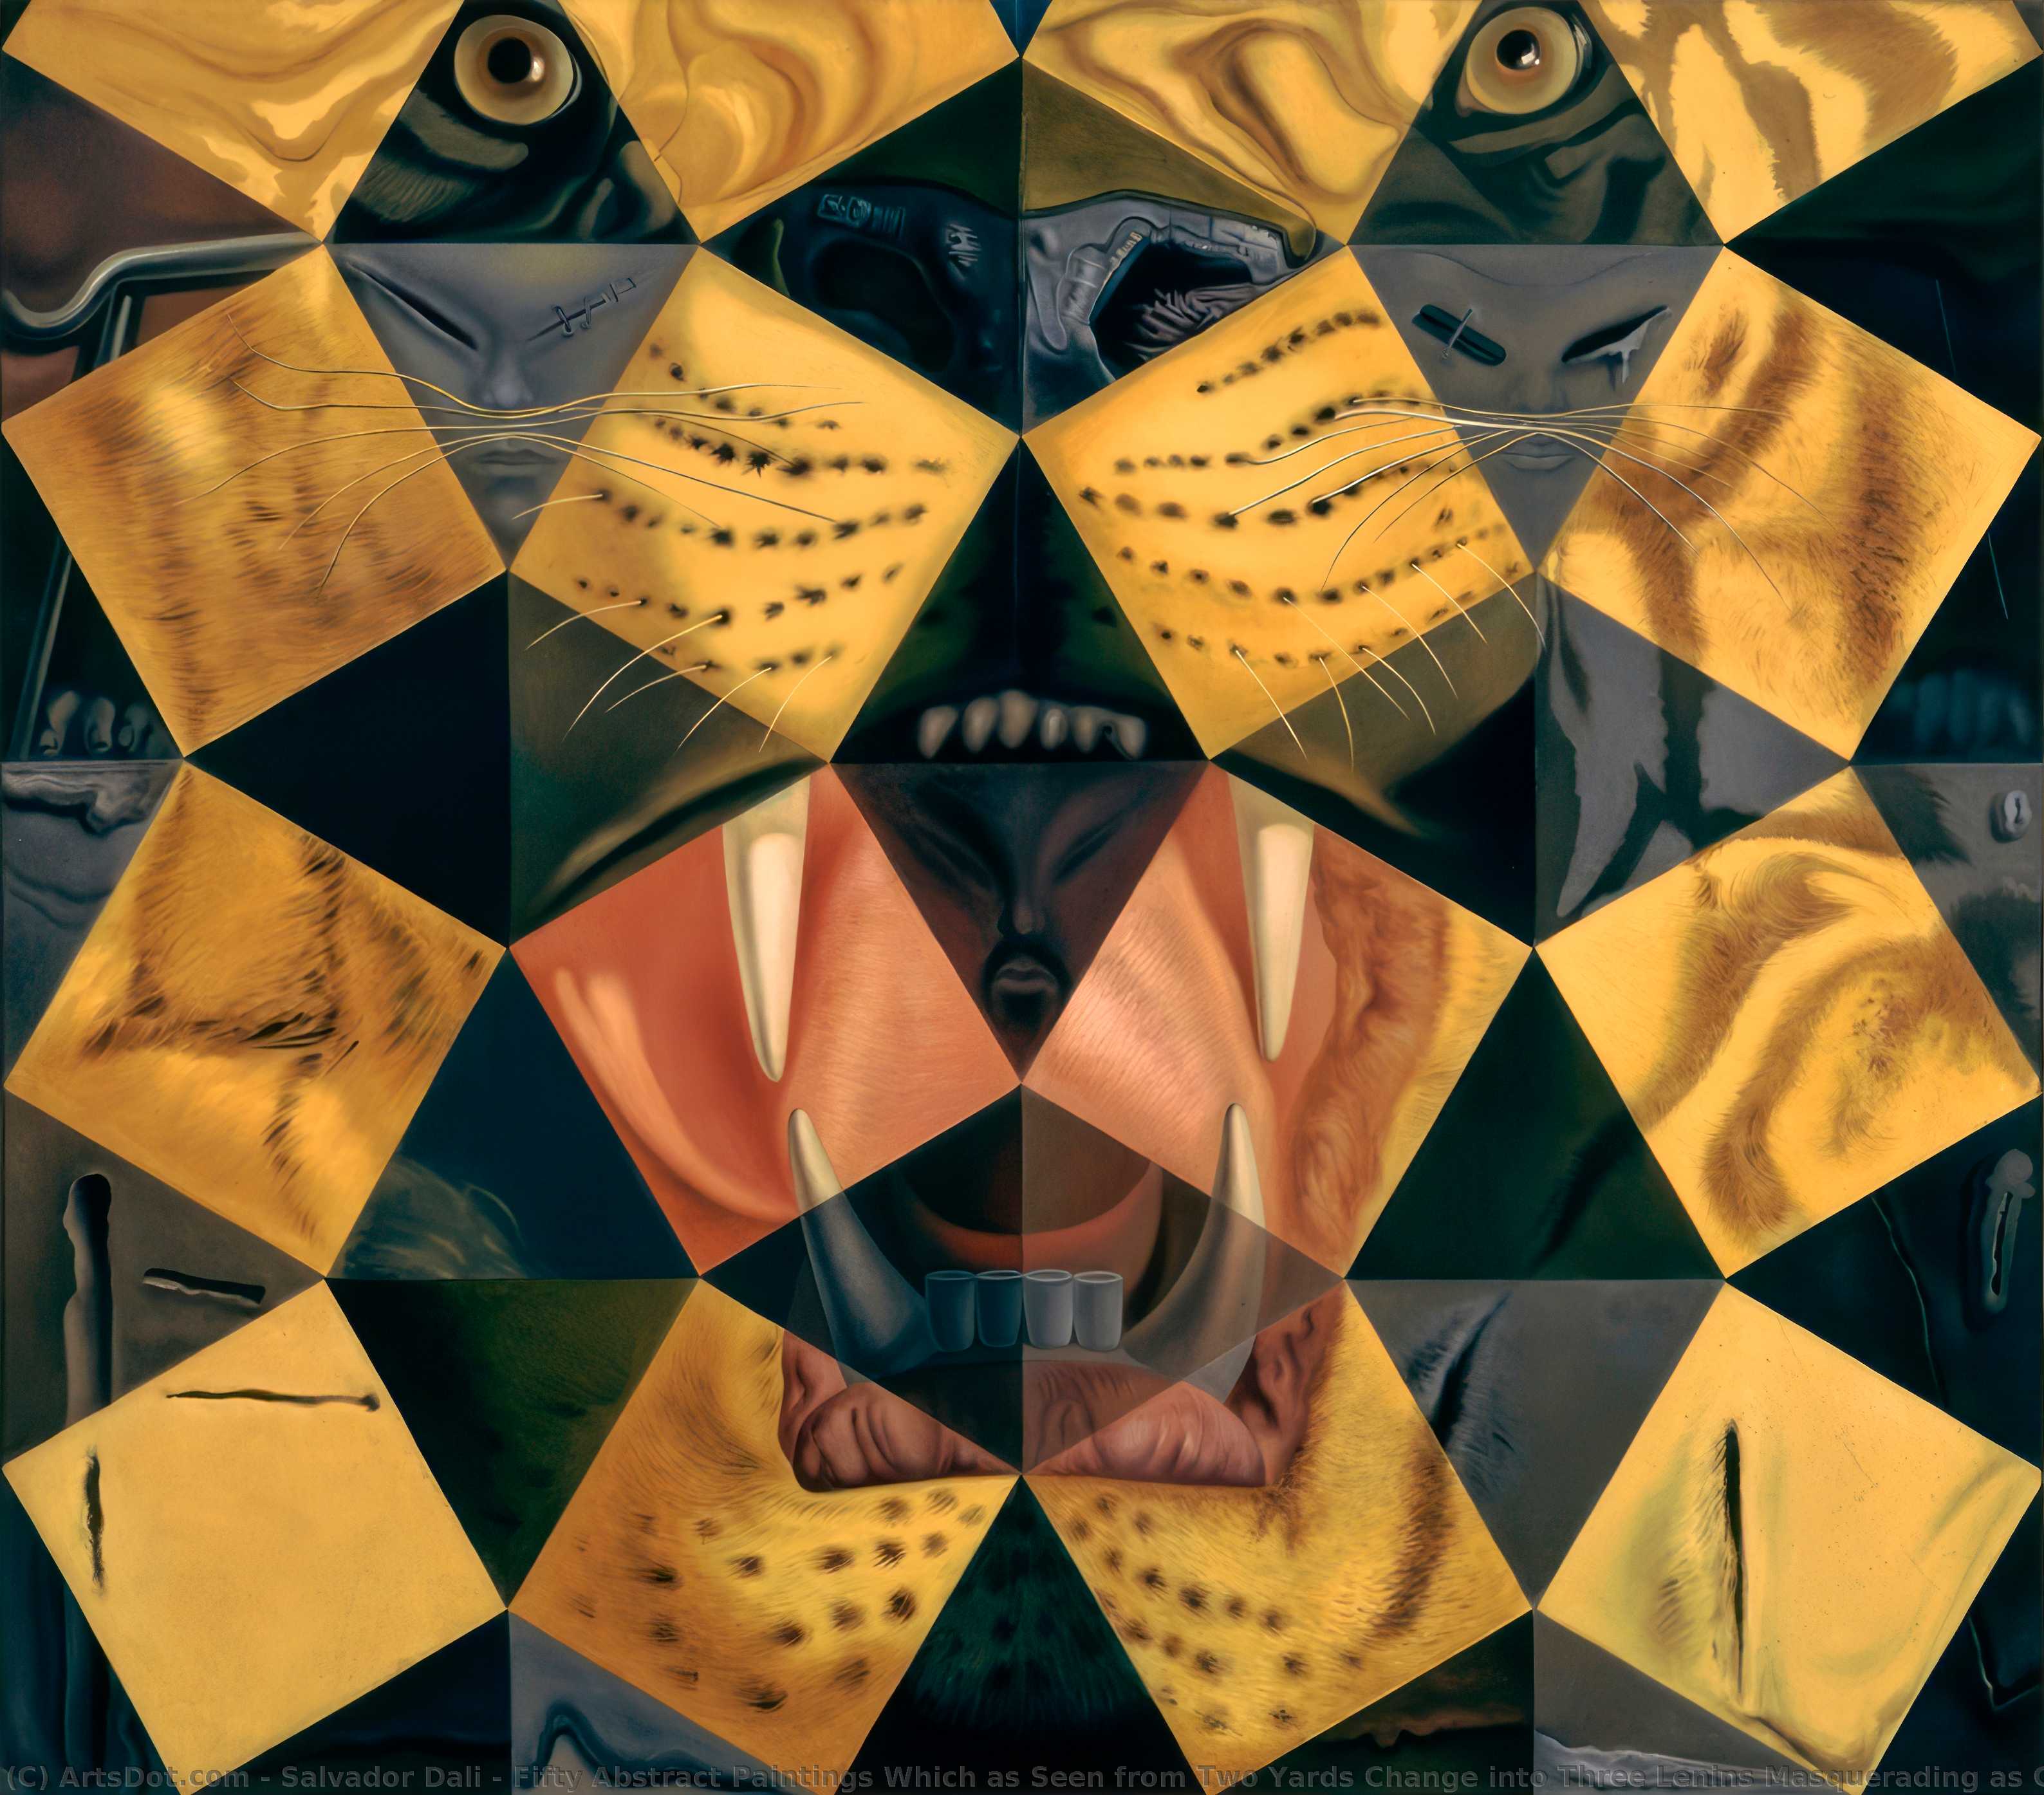 WikiOO.org - Encyclopedia of Fine Arts - Maľba, Artwork Salvador Dali - Fifty Abstract Paintings Which as Seen from Two Yards Change into Three Lenins Masquerading as Chinese and as Seen from Six Yards Appear as the Head of a Royal Bengal Tiger, 1963